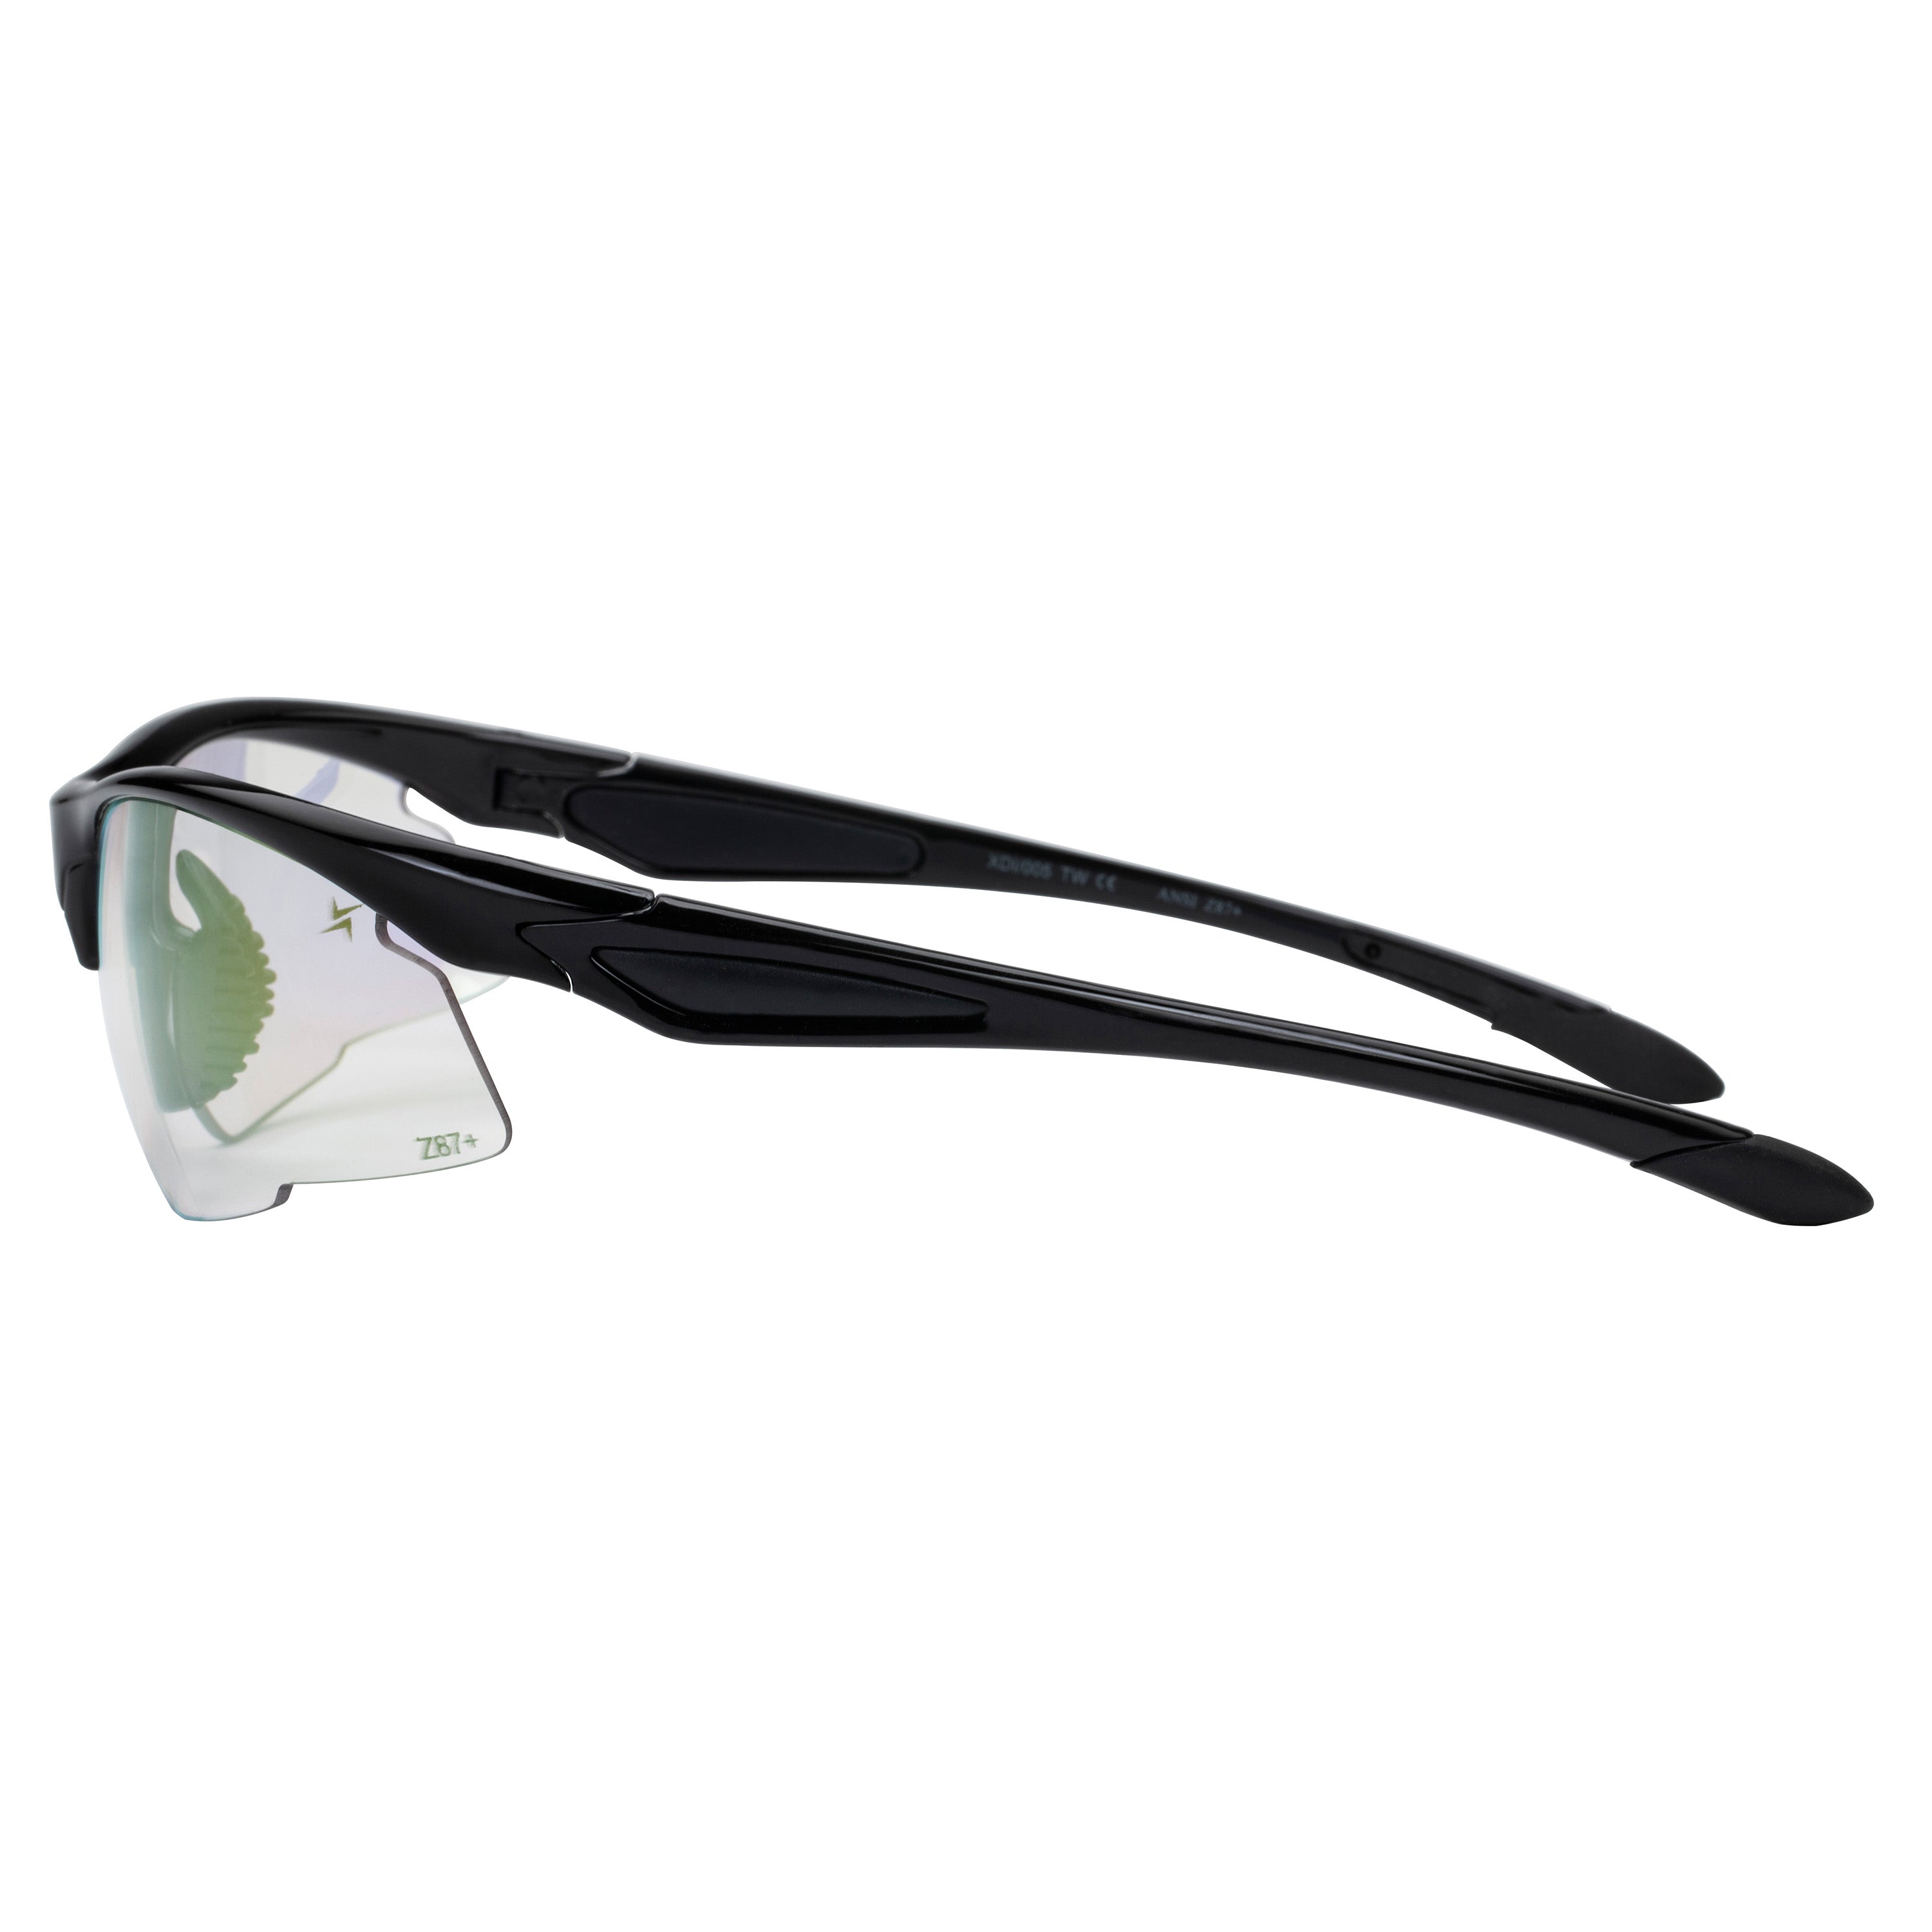 Clear to Brown Photochromic Lens with Gold Mirror Coating Black Half Frame Wrap Around Sport Safety Sunglasses.